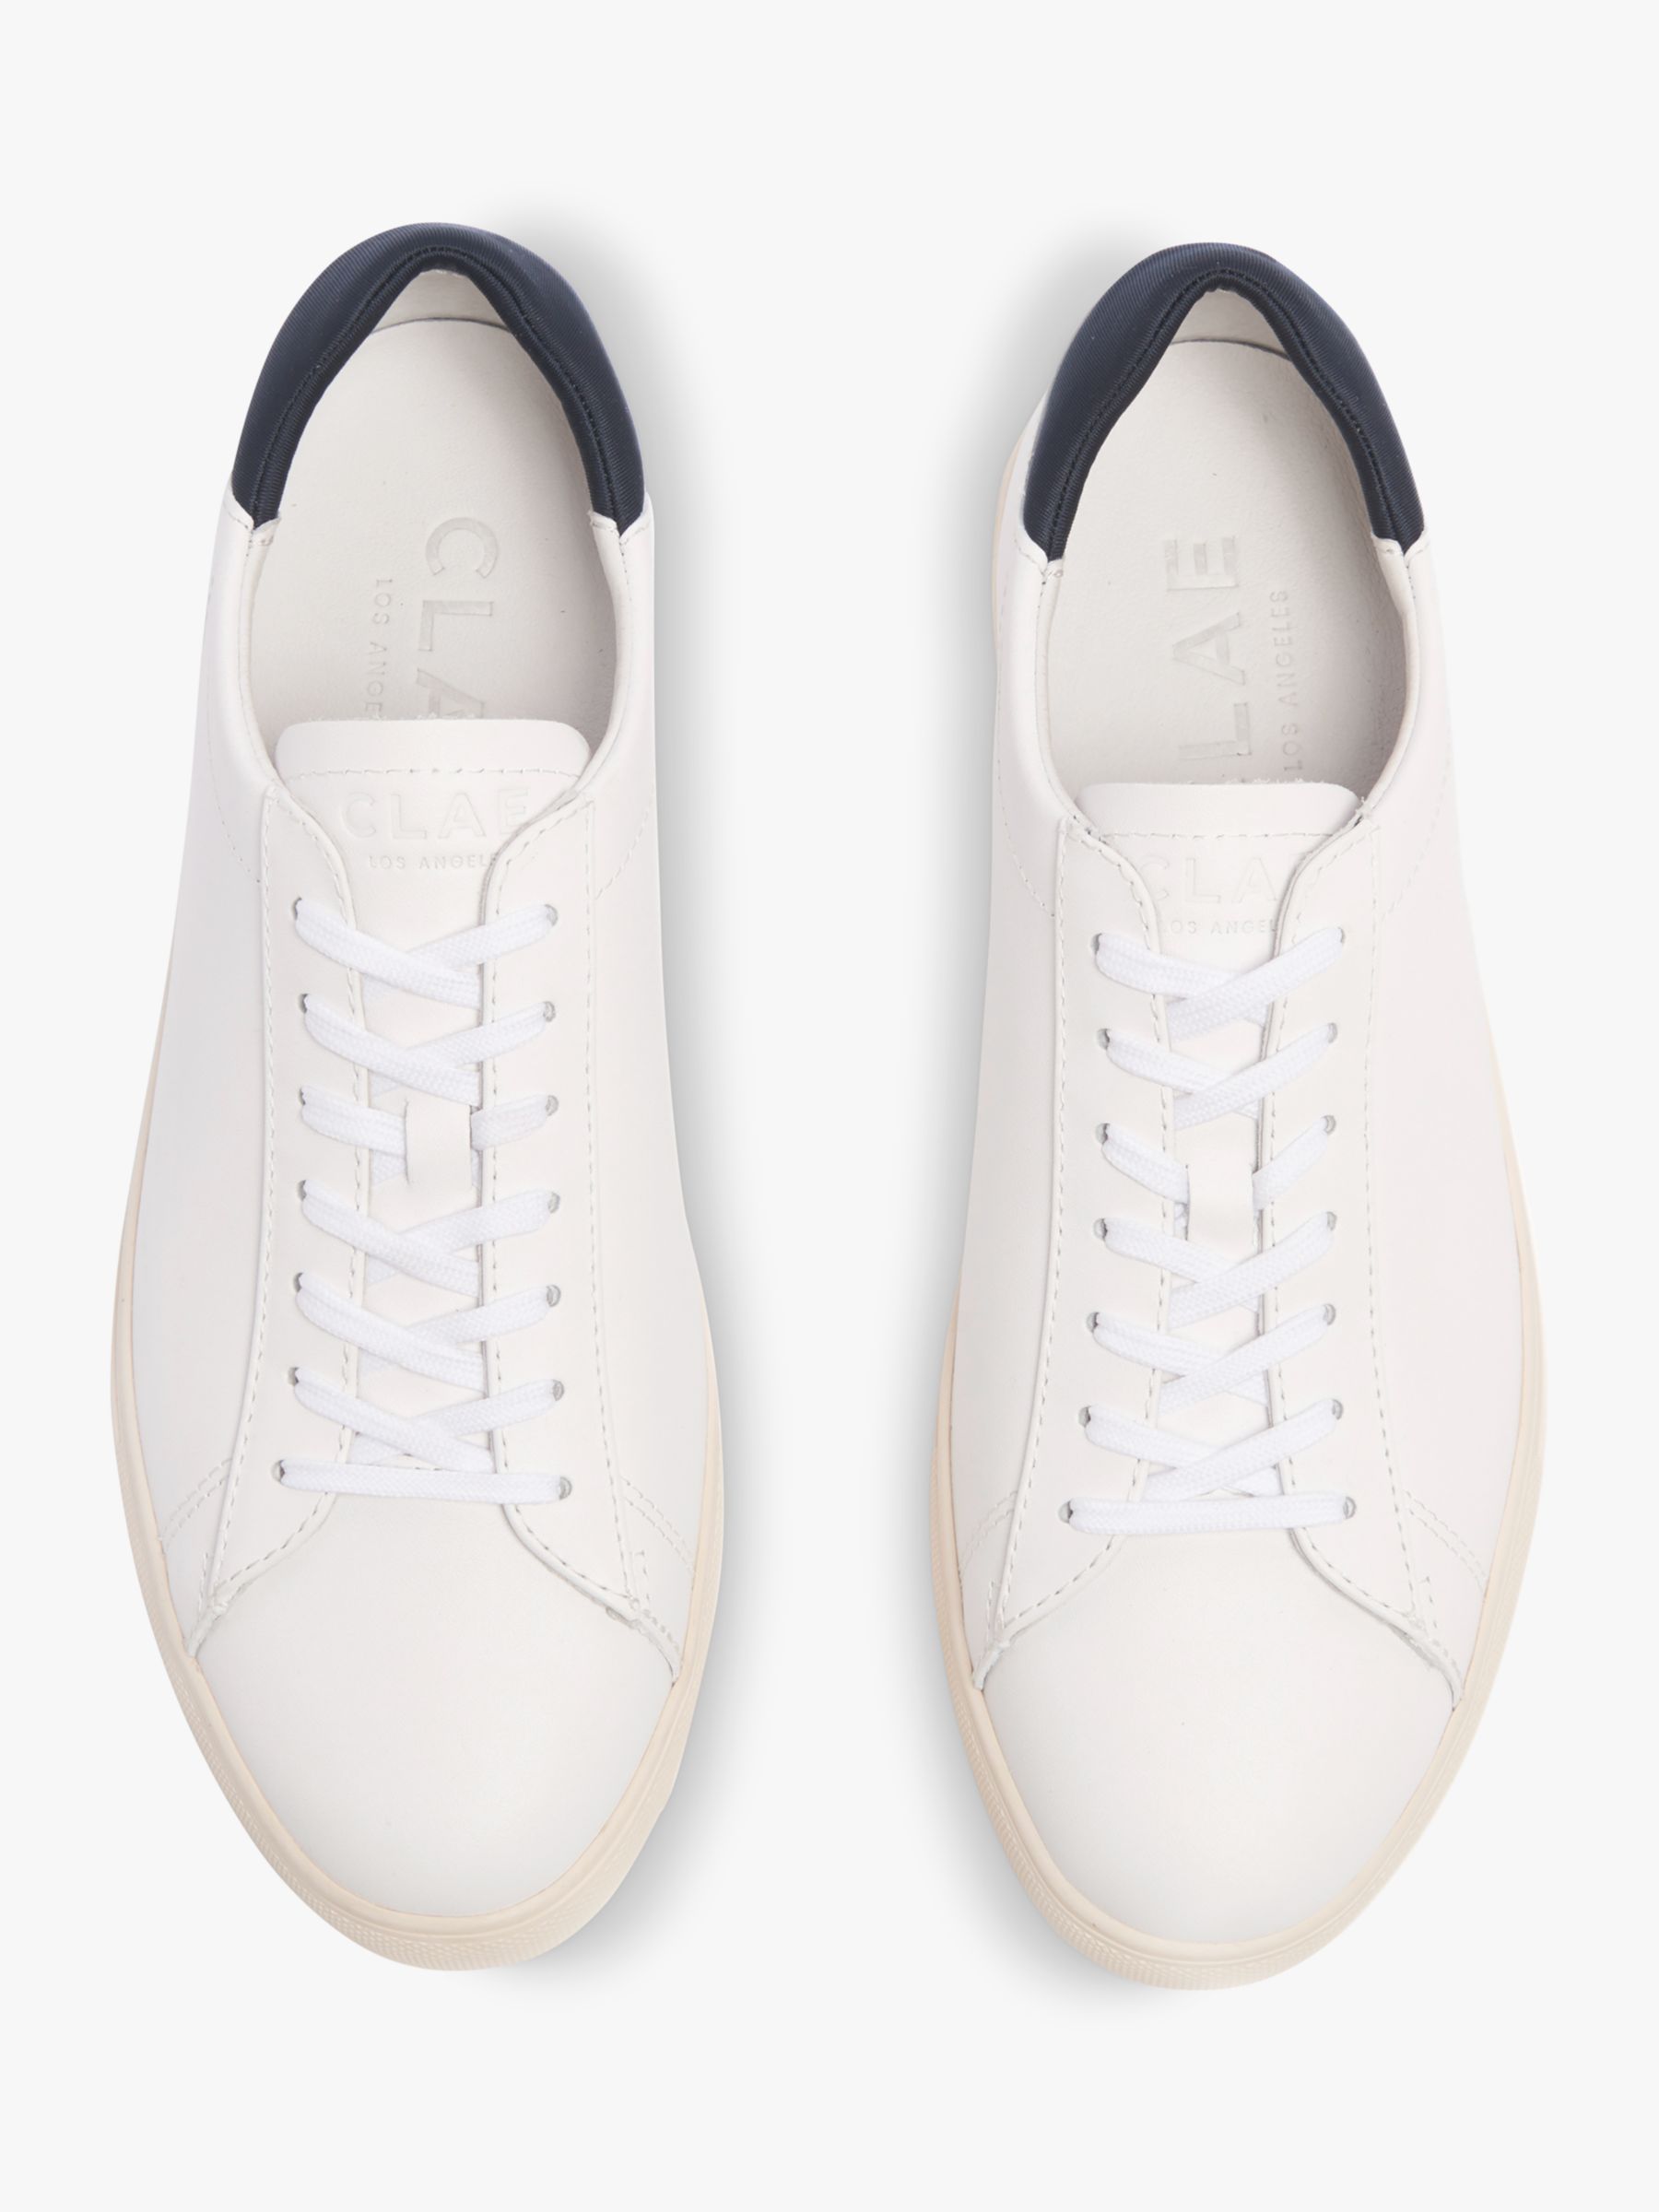 CLAE Bradley Essentials Leather Trainers, White at John Lewis & Partners